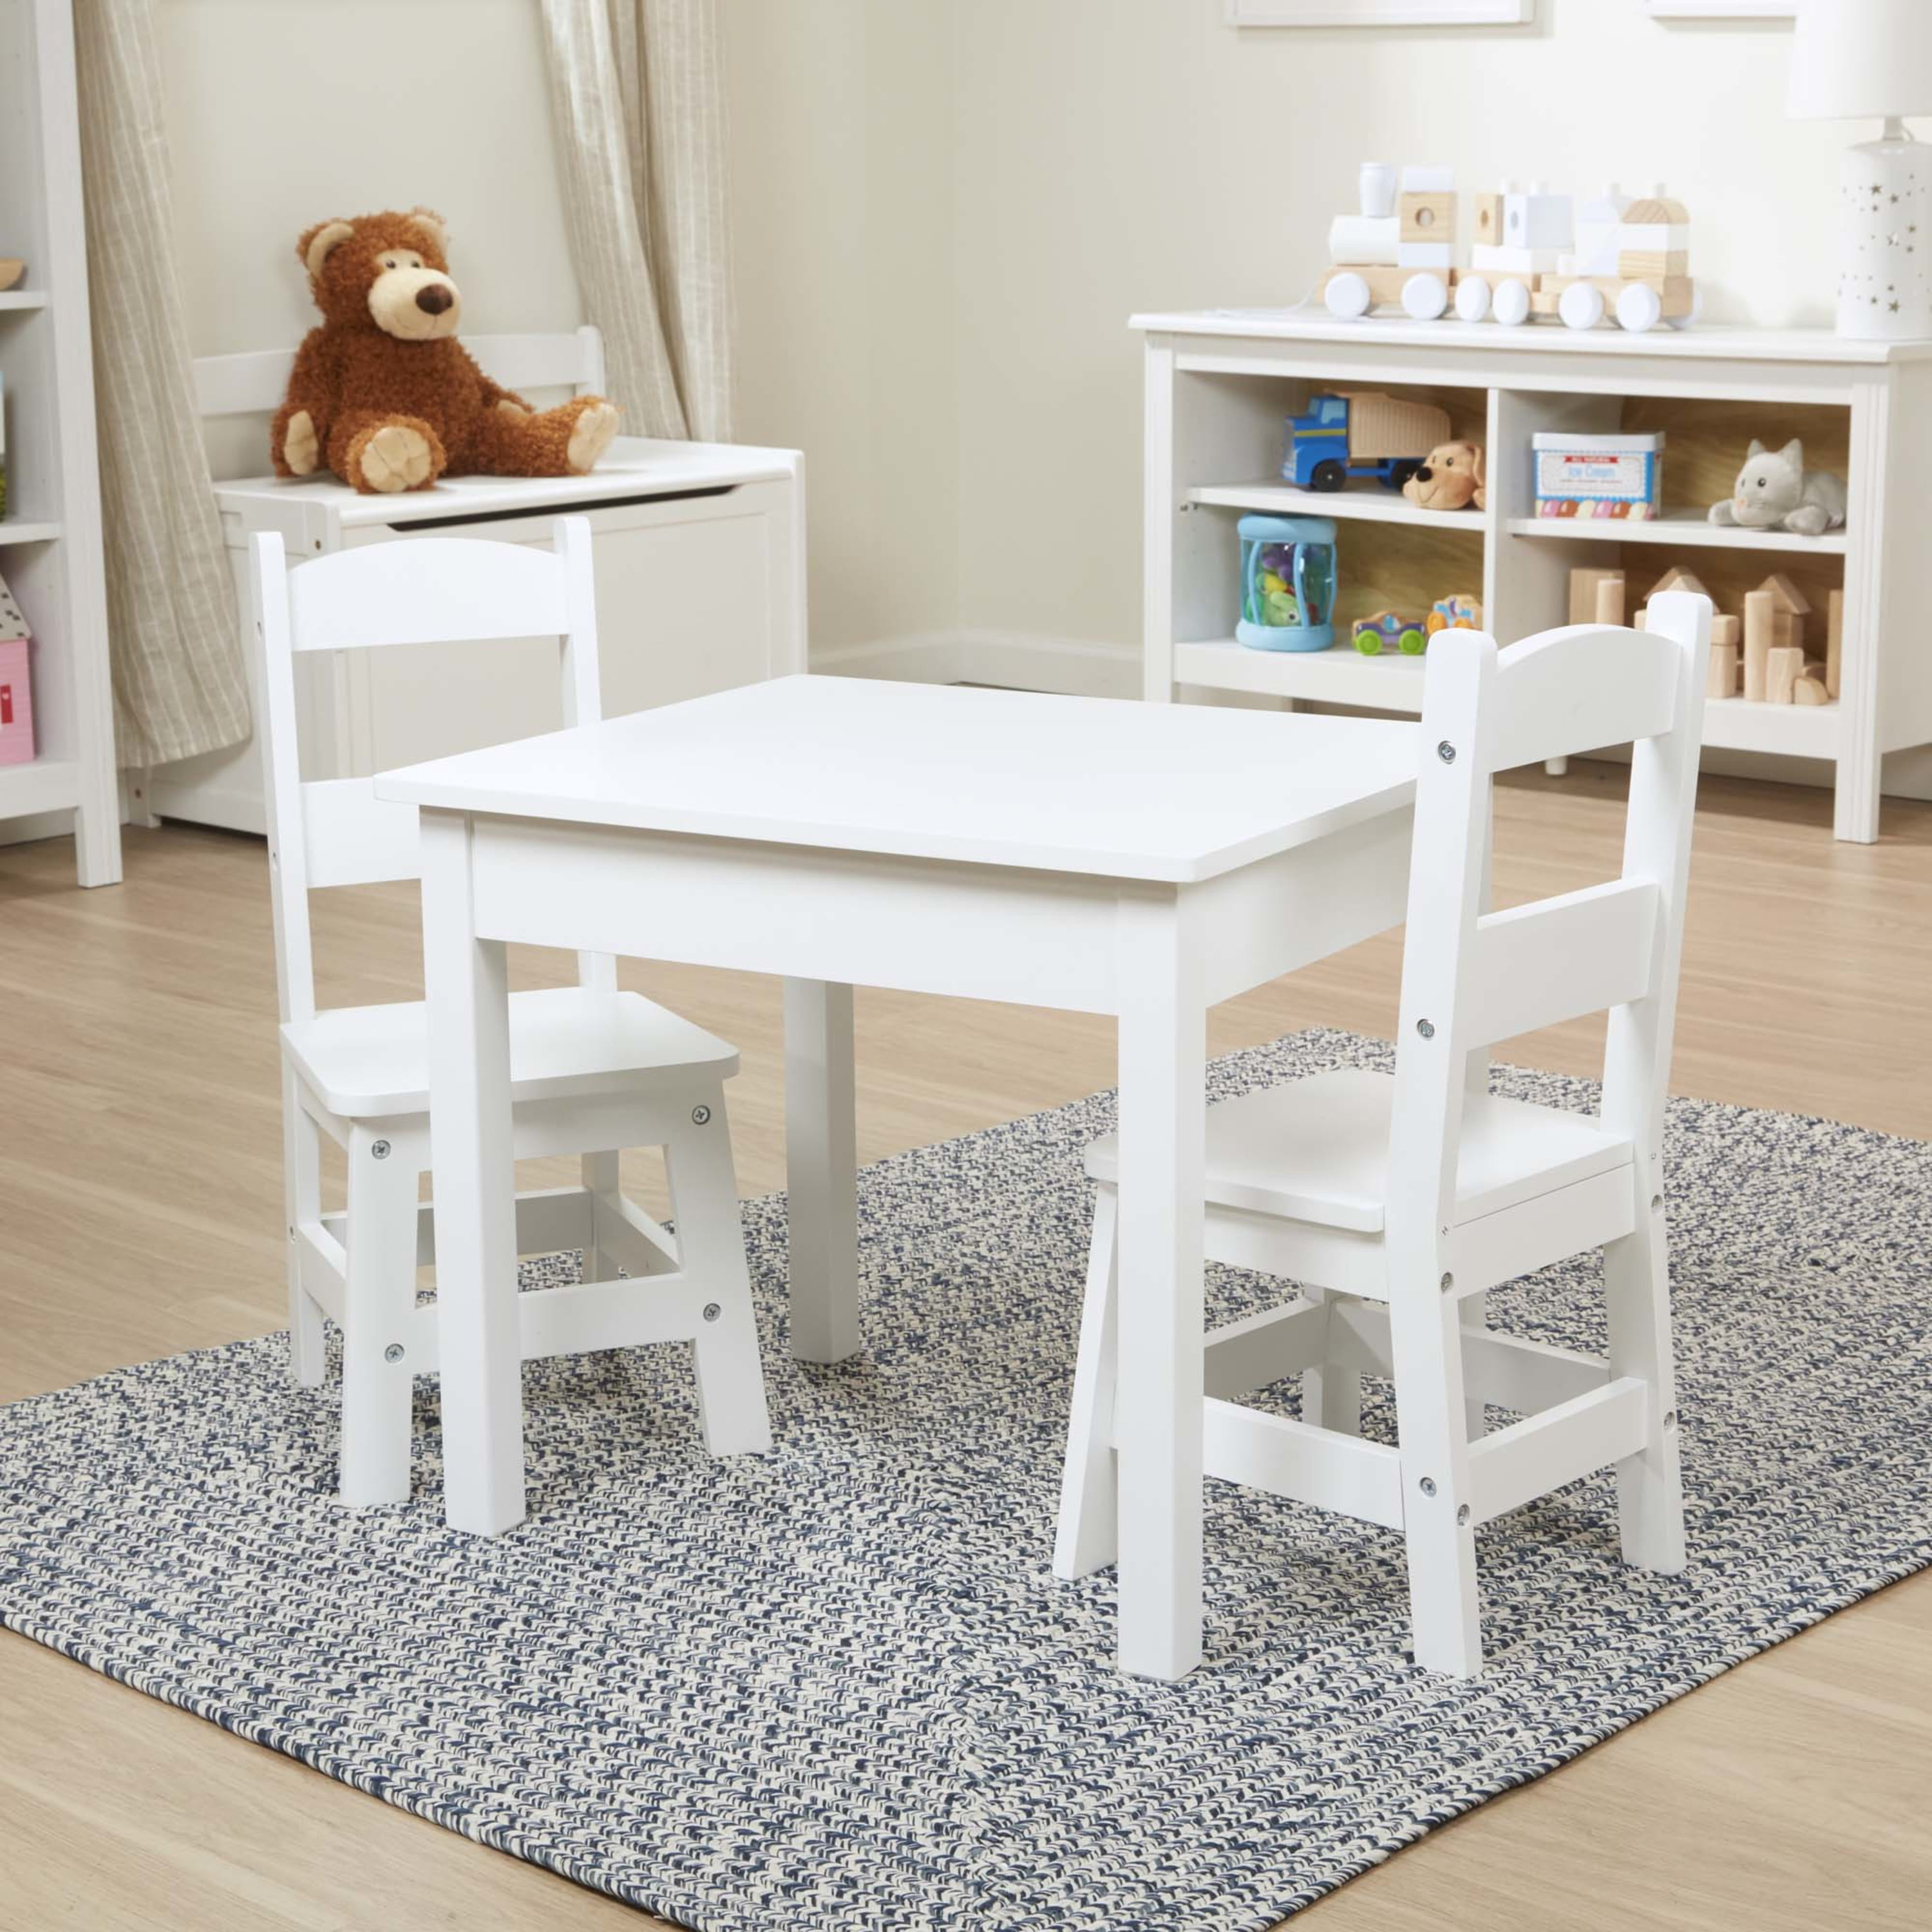  Melissa & Doug Wooden Square Table (White) - Kids Table,  Children's Furniture, Play Table for Kids Crafts, Kids Activity Table :  Home & Kitchen